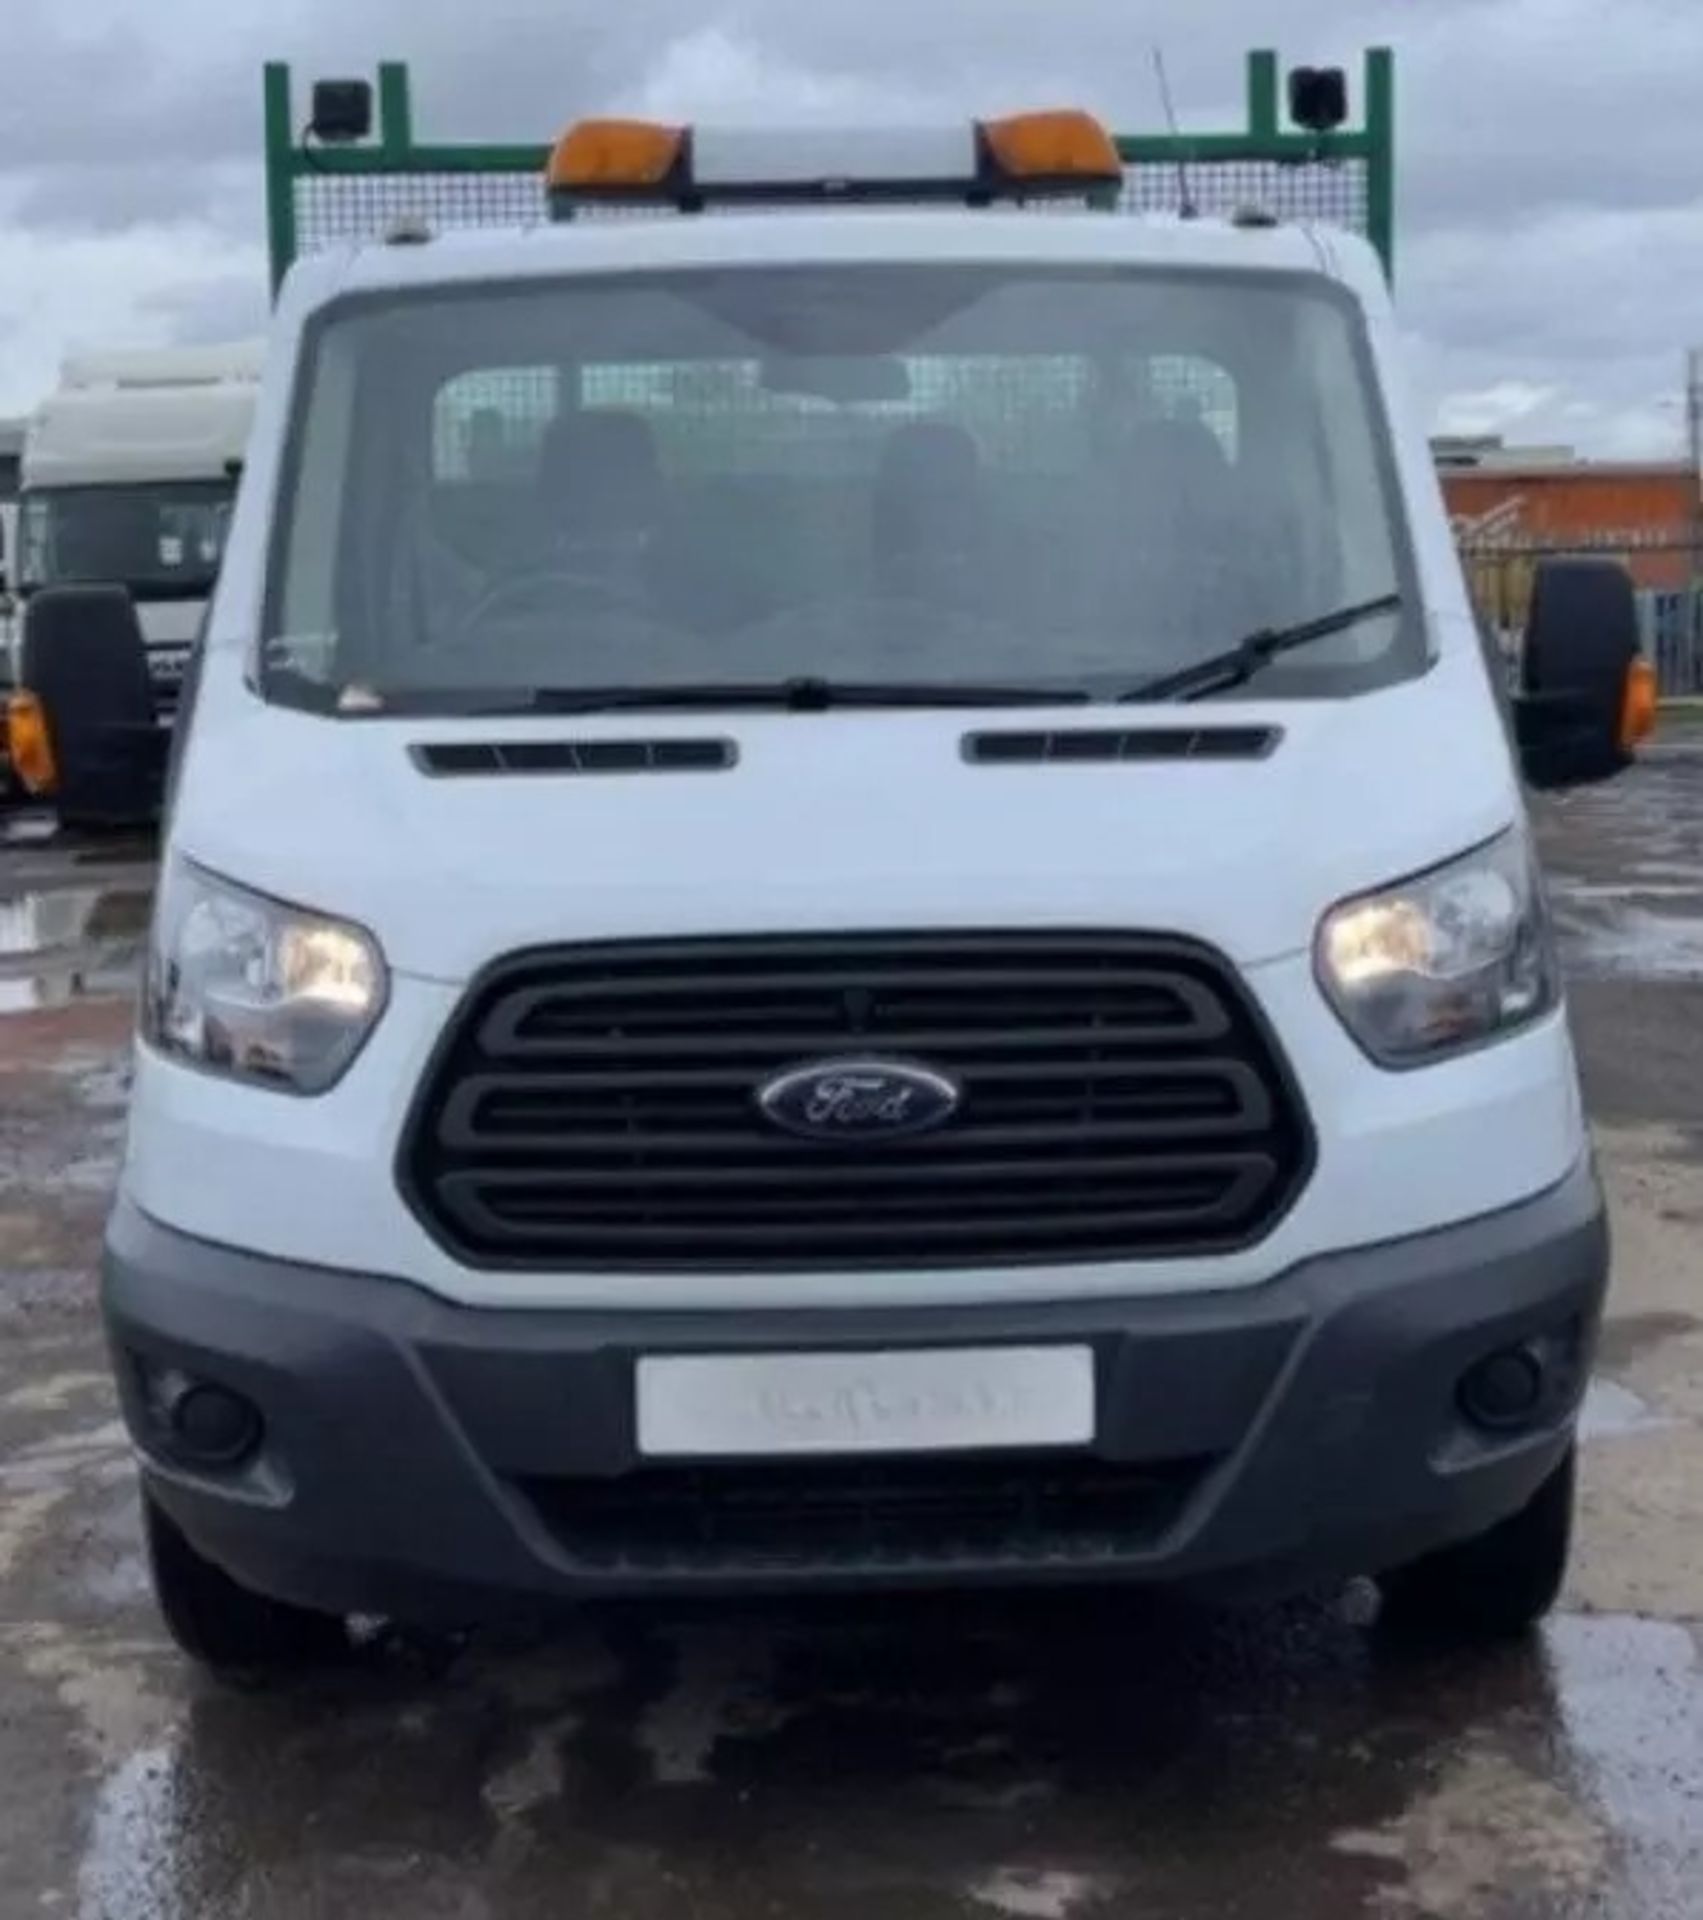 2019 FORD TRANSIT T350 LWB DROPSIDE TRUCK - VERSATILE, RELIABLE, AND READY FOR HEAVY DUTY - Image 3 of 16